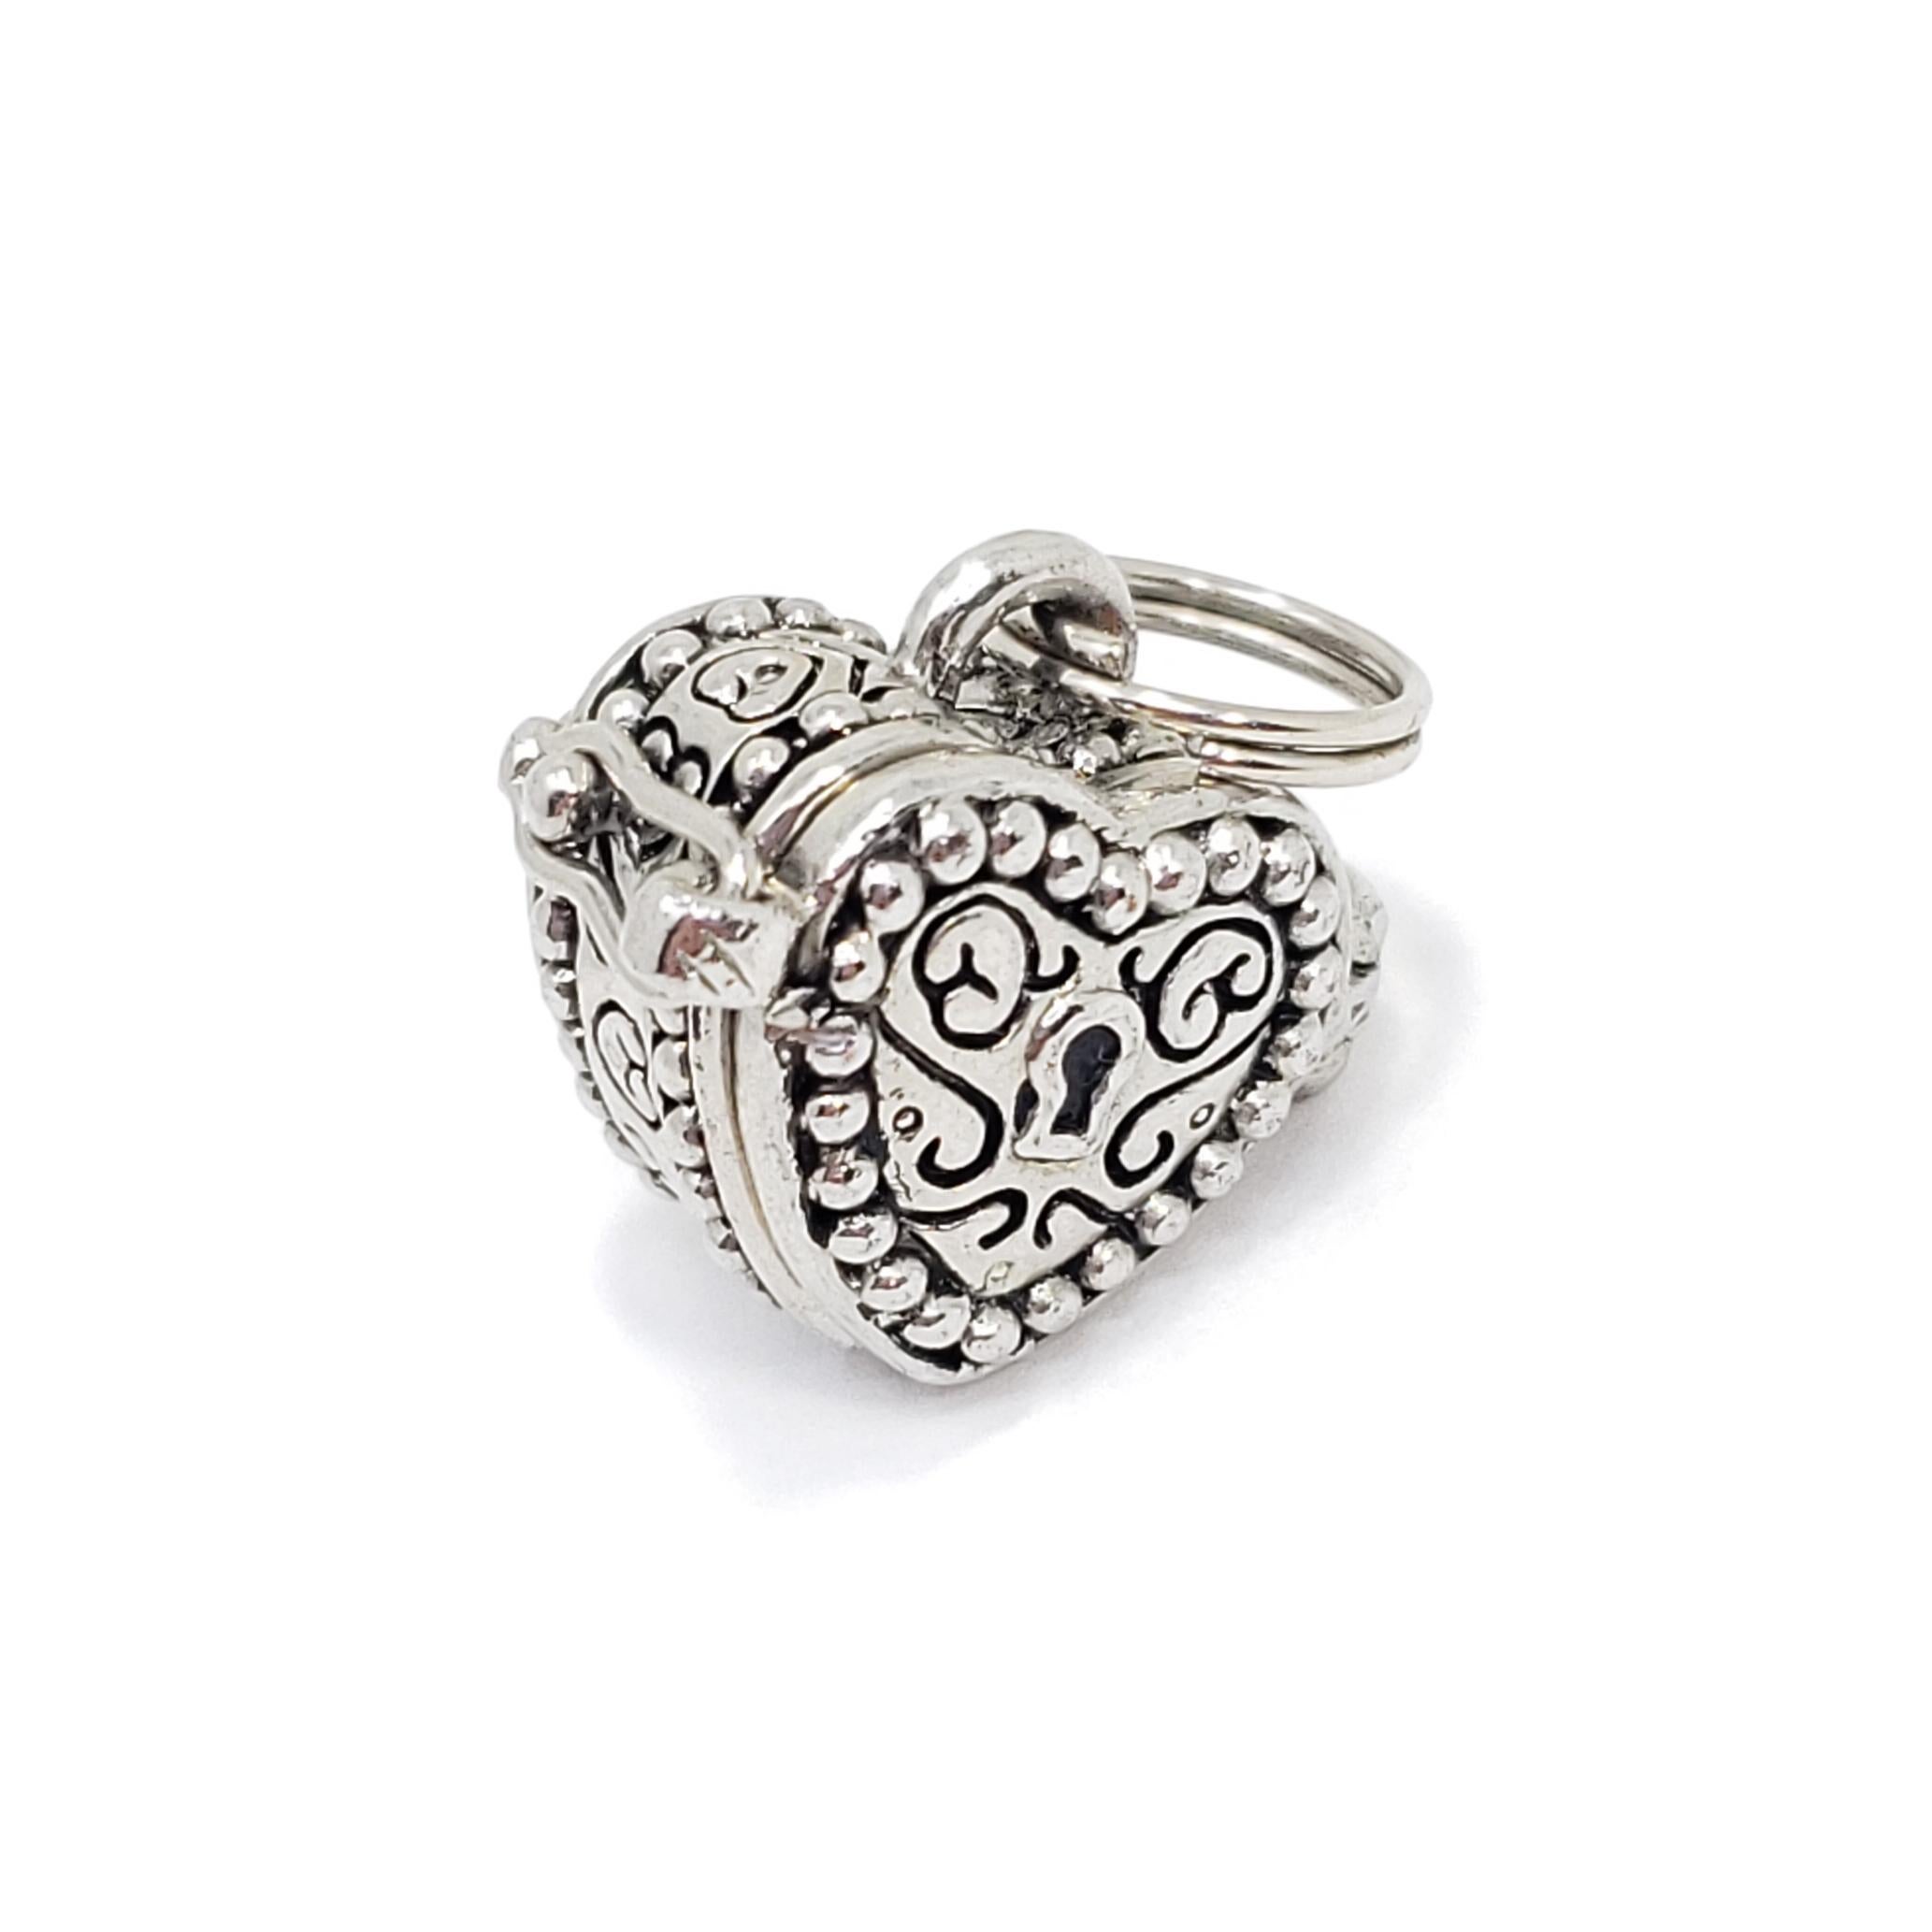 This vintage locket pendant features an accented heart with a keyhole motif, for your most meaningful possessions!

Sterling silver, circa mid 1900s. Snap closure. Comes without chain. 